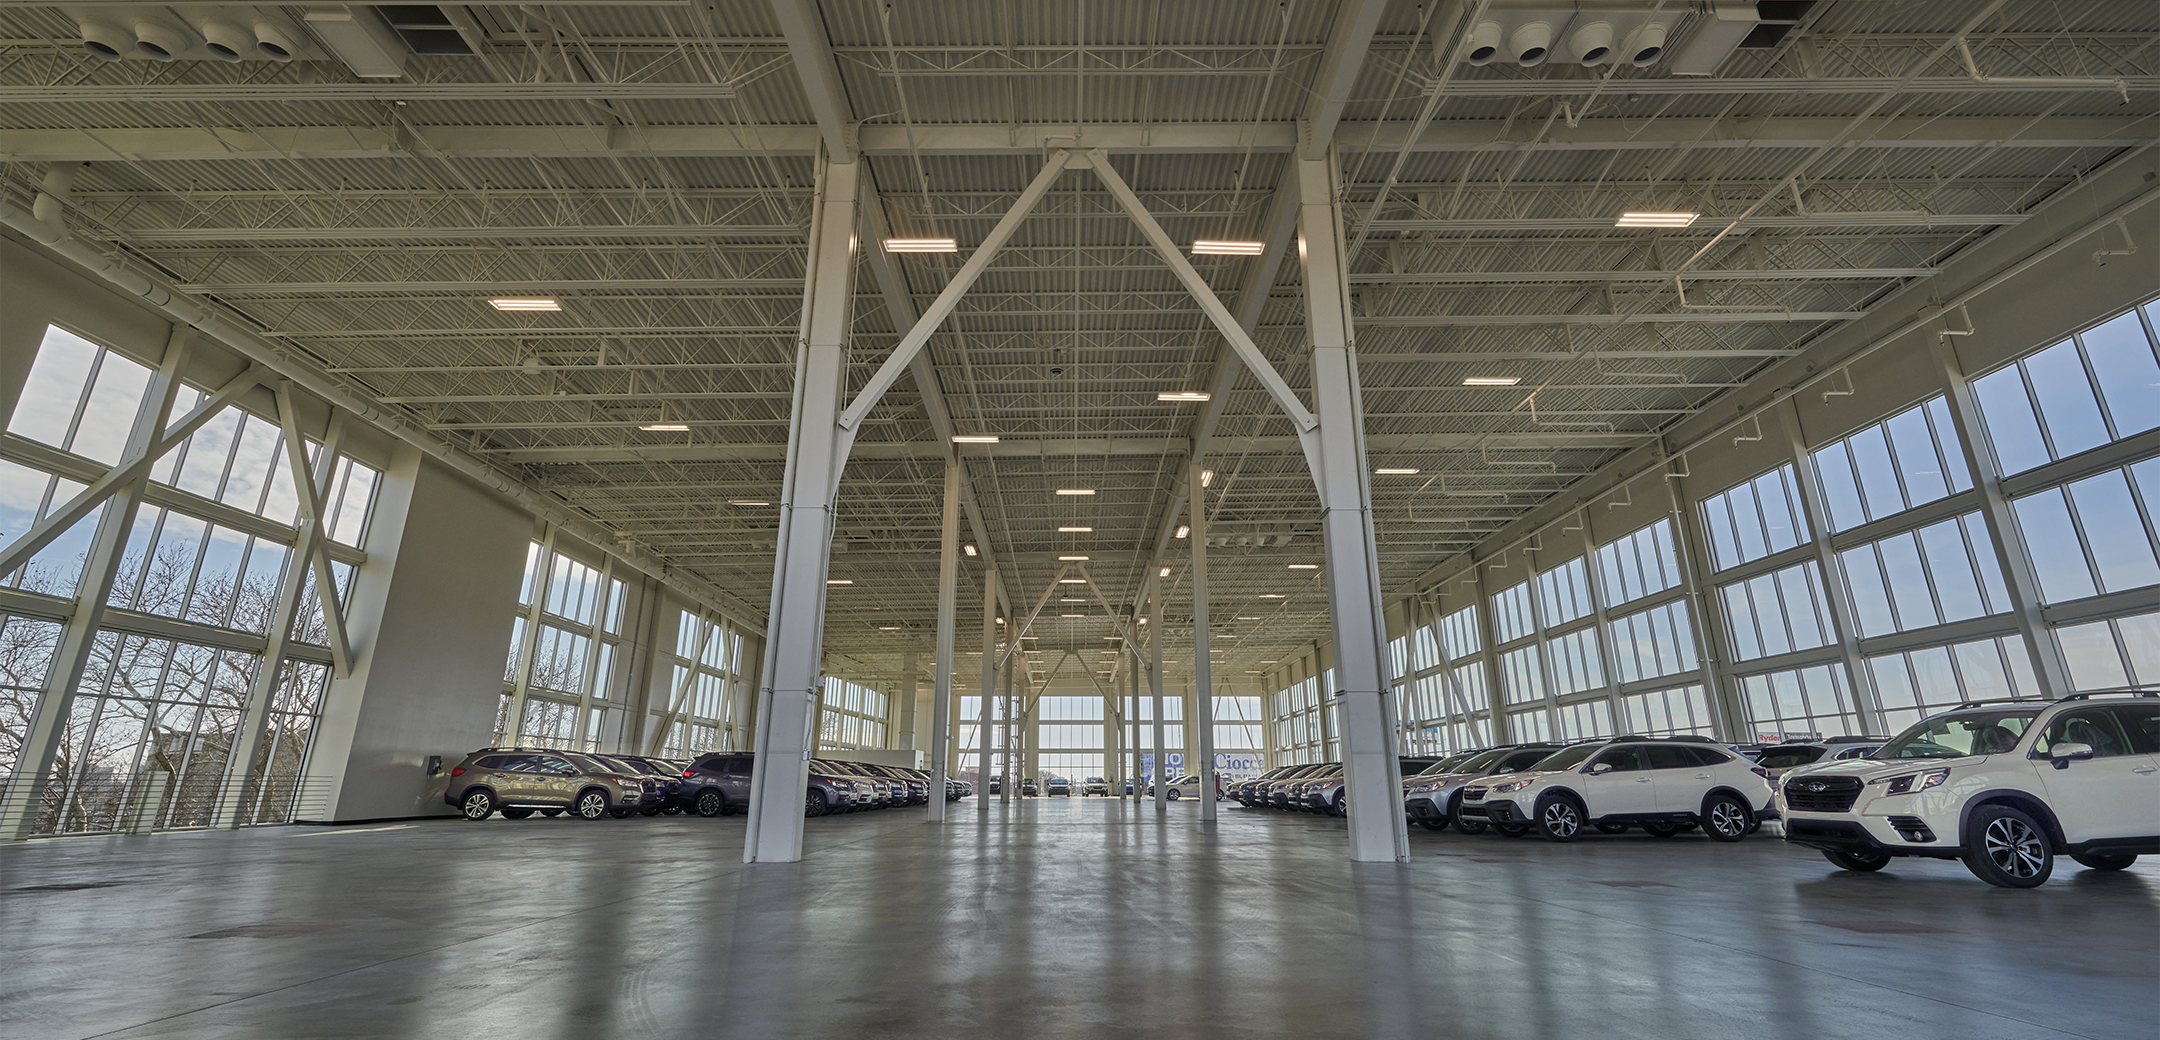 The interior view of the Ciocca Subaru building with tall ceilings, glass panel windows, metal support pillars and cars lined upon along the walls.